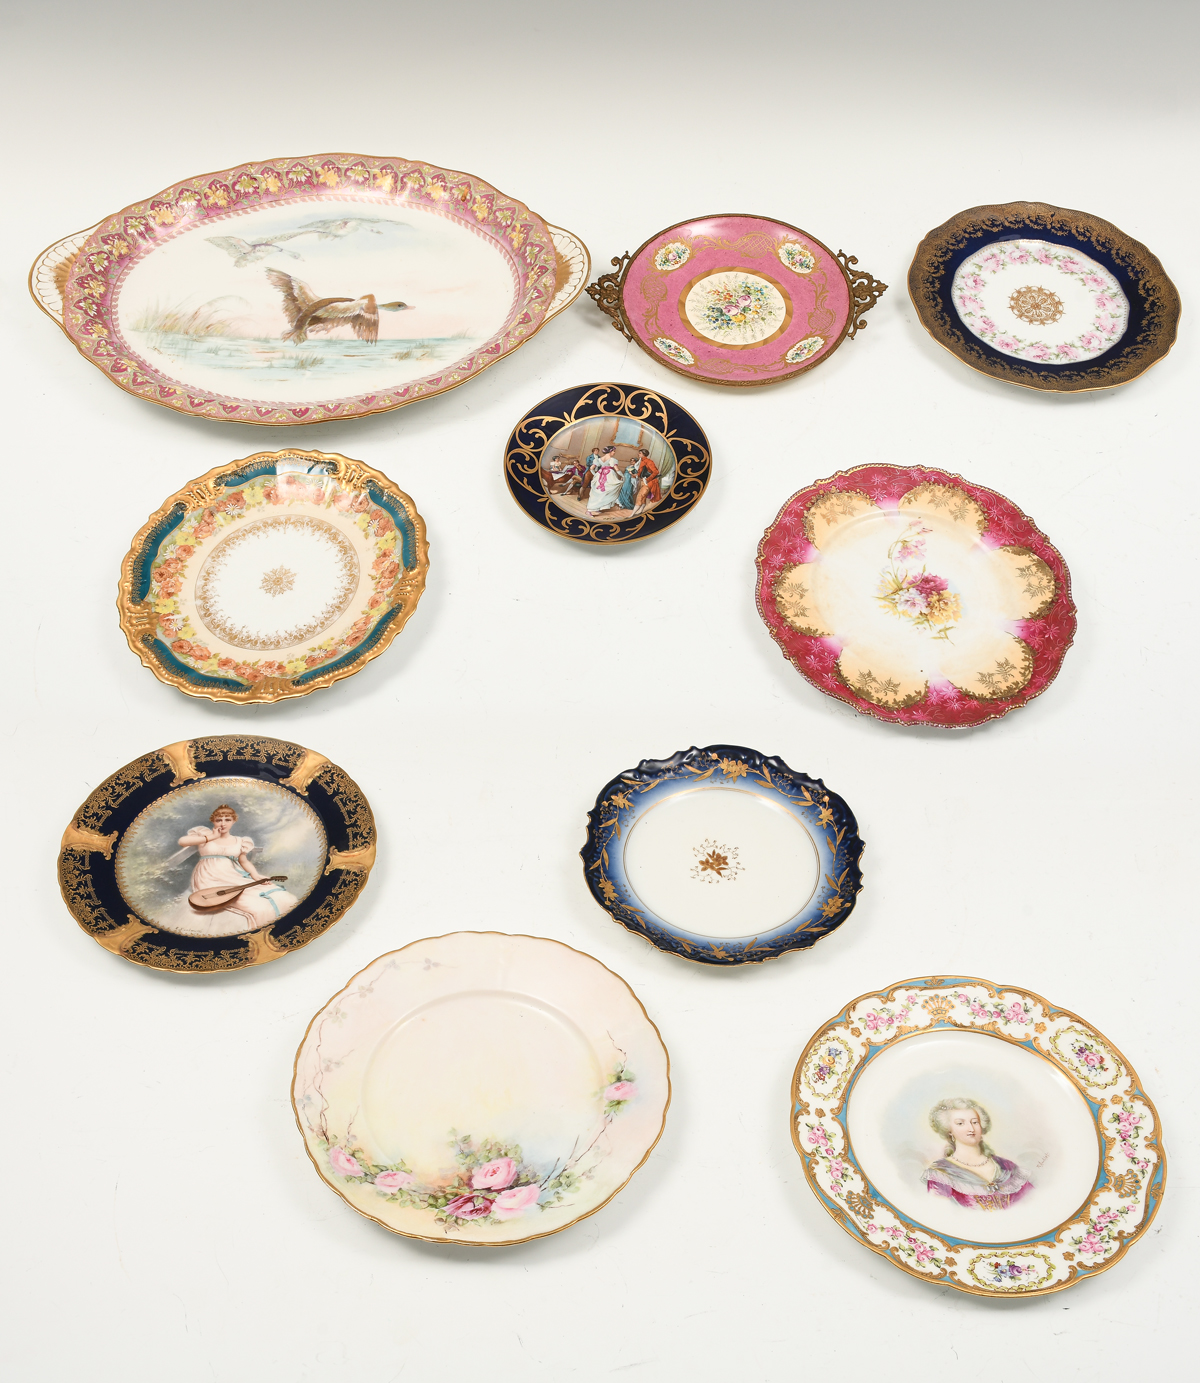 10 PC FRENCH LIMOGES PLATES  36a5c5